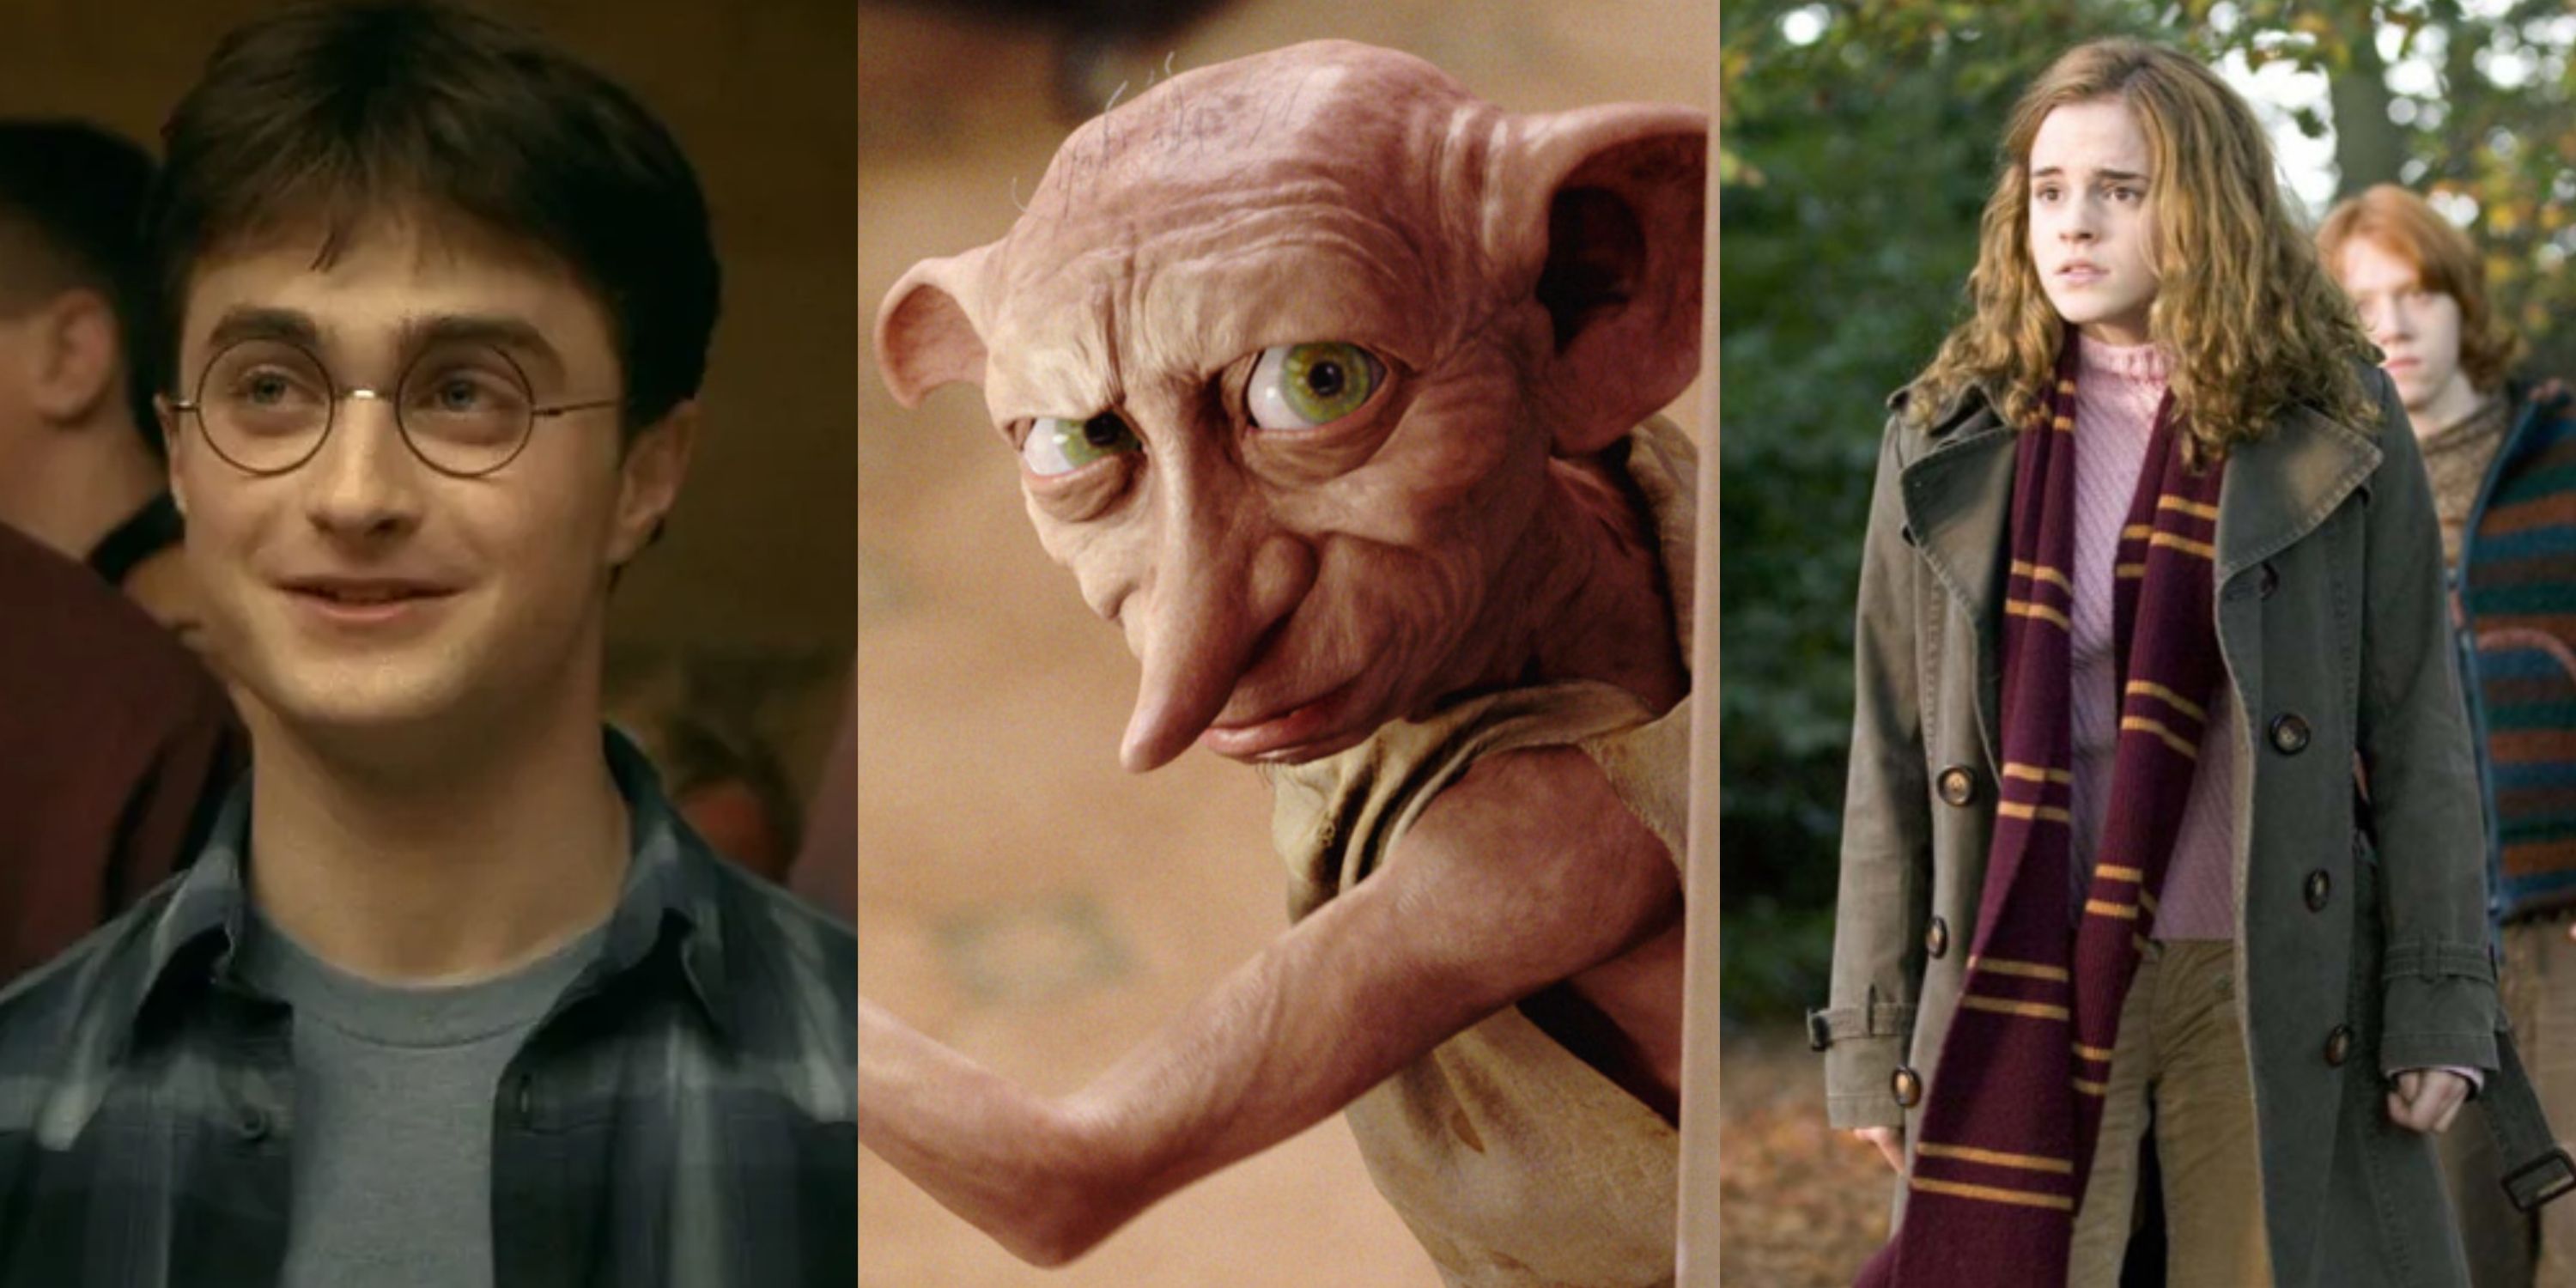 Split image of Harry smiling, Dobby looking serious with arm raised, and Hermione standing outside with Ron behind her